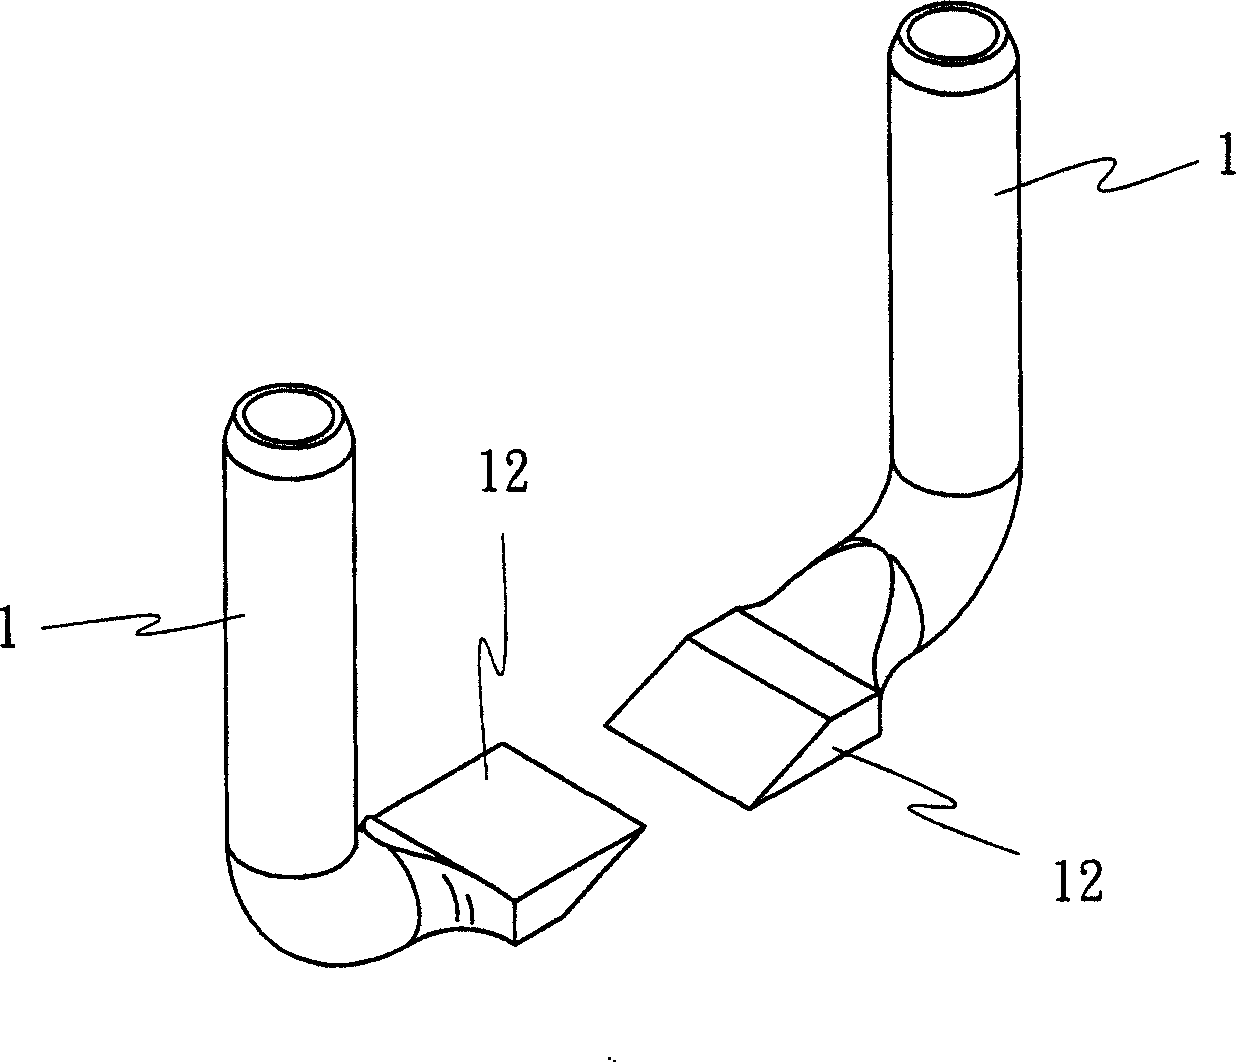 Making method for dual lead device clamp